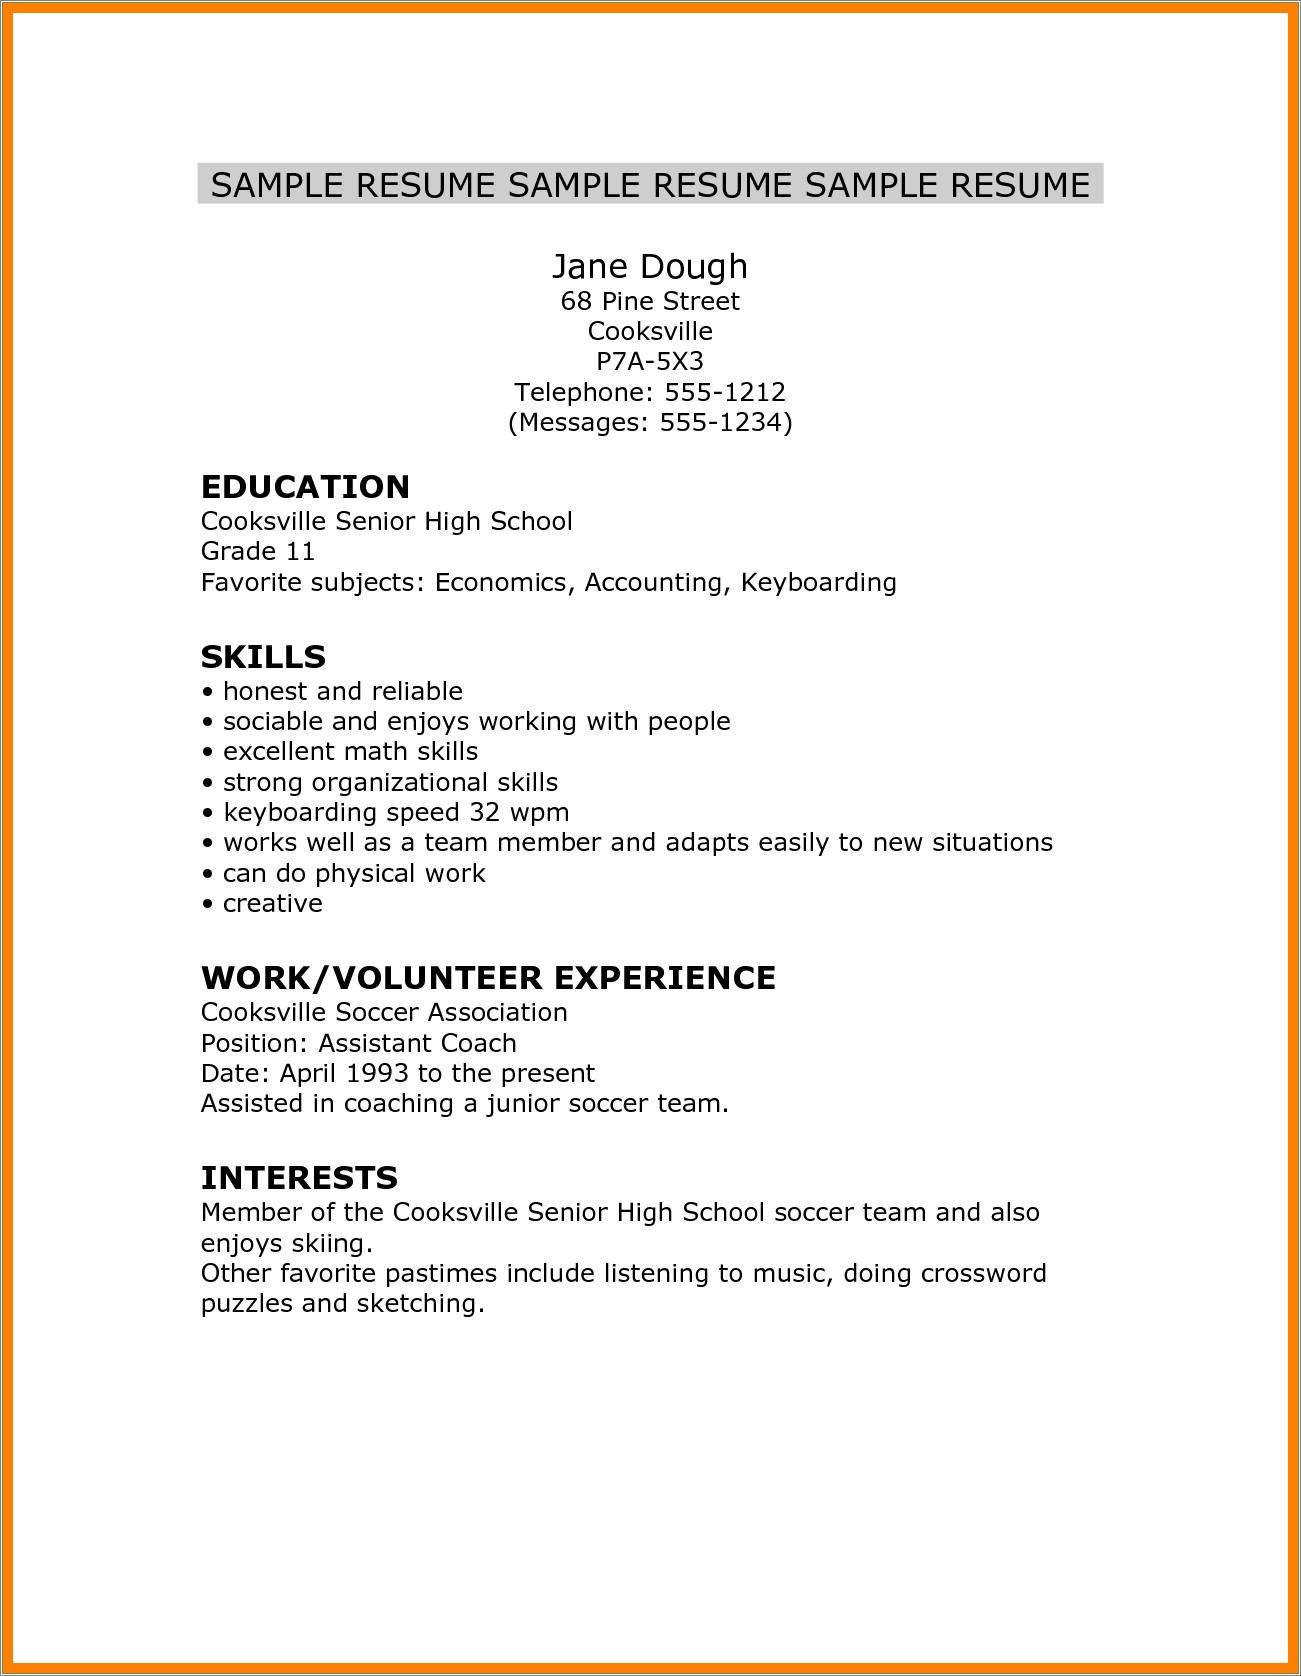 A Sample Resume For High School Student